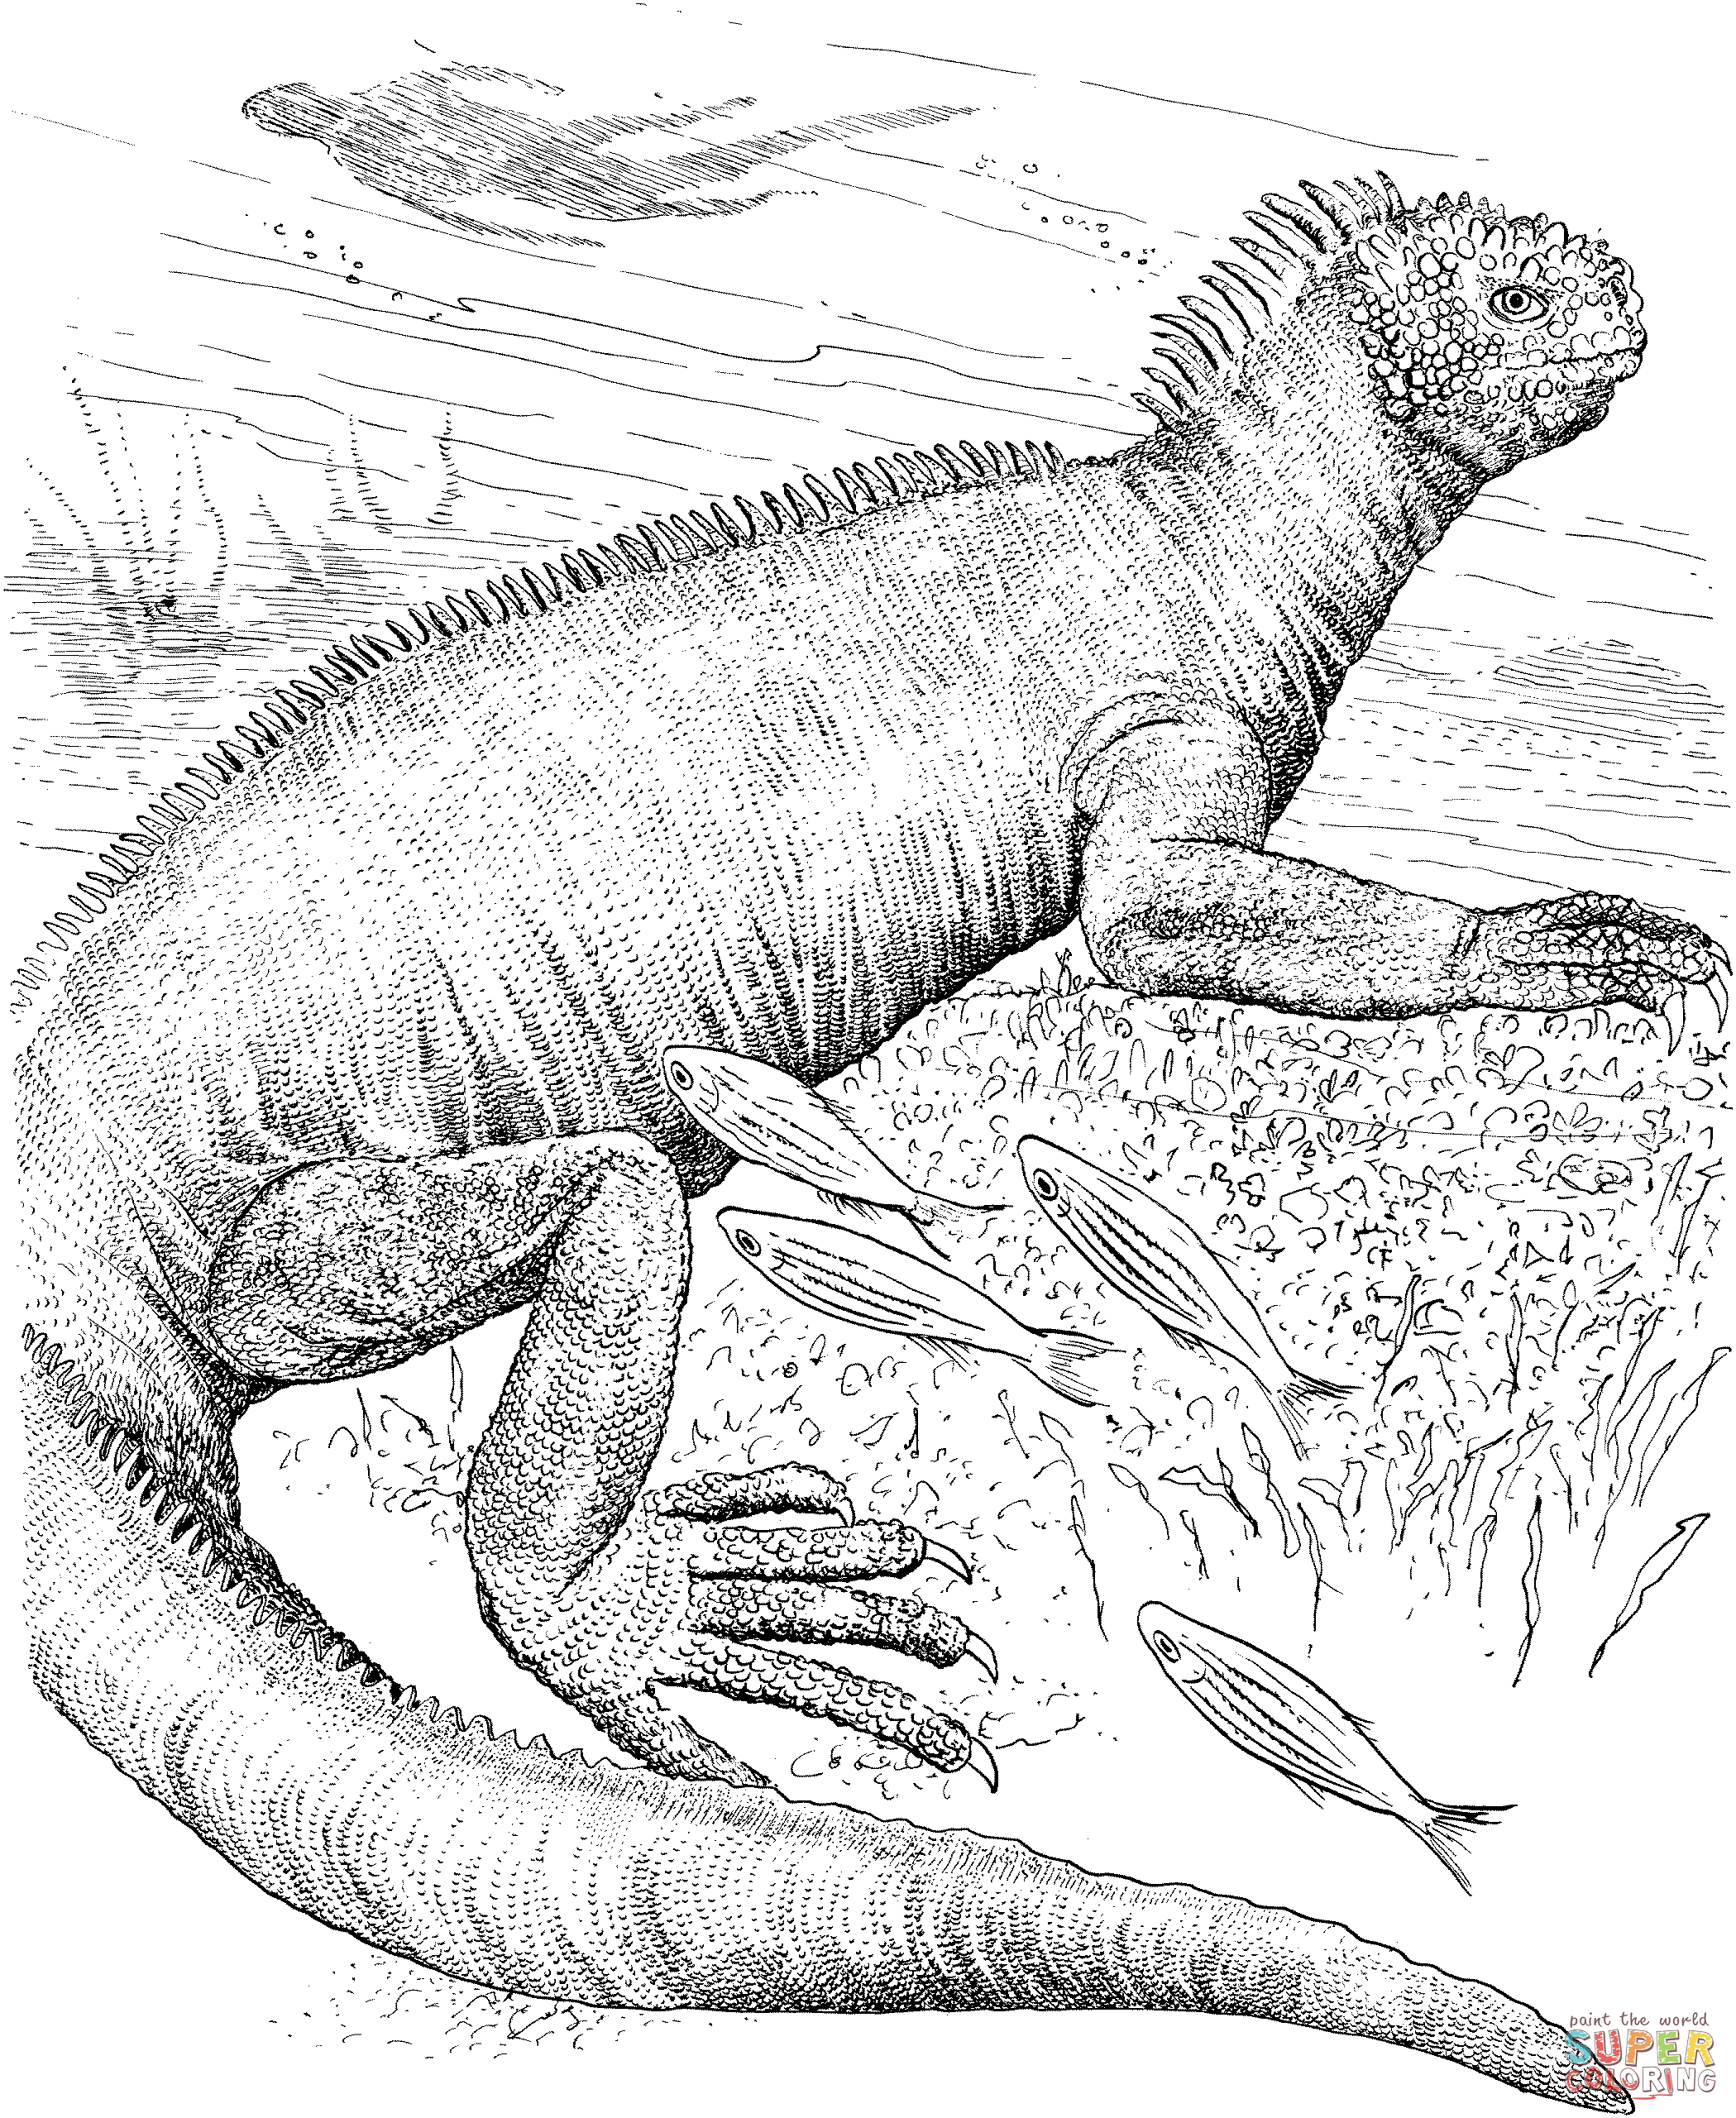 Galapagos animals coloring pages | Free Printable Pictures